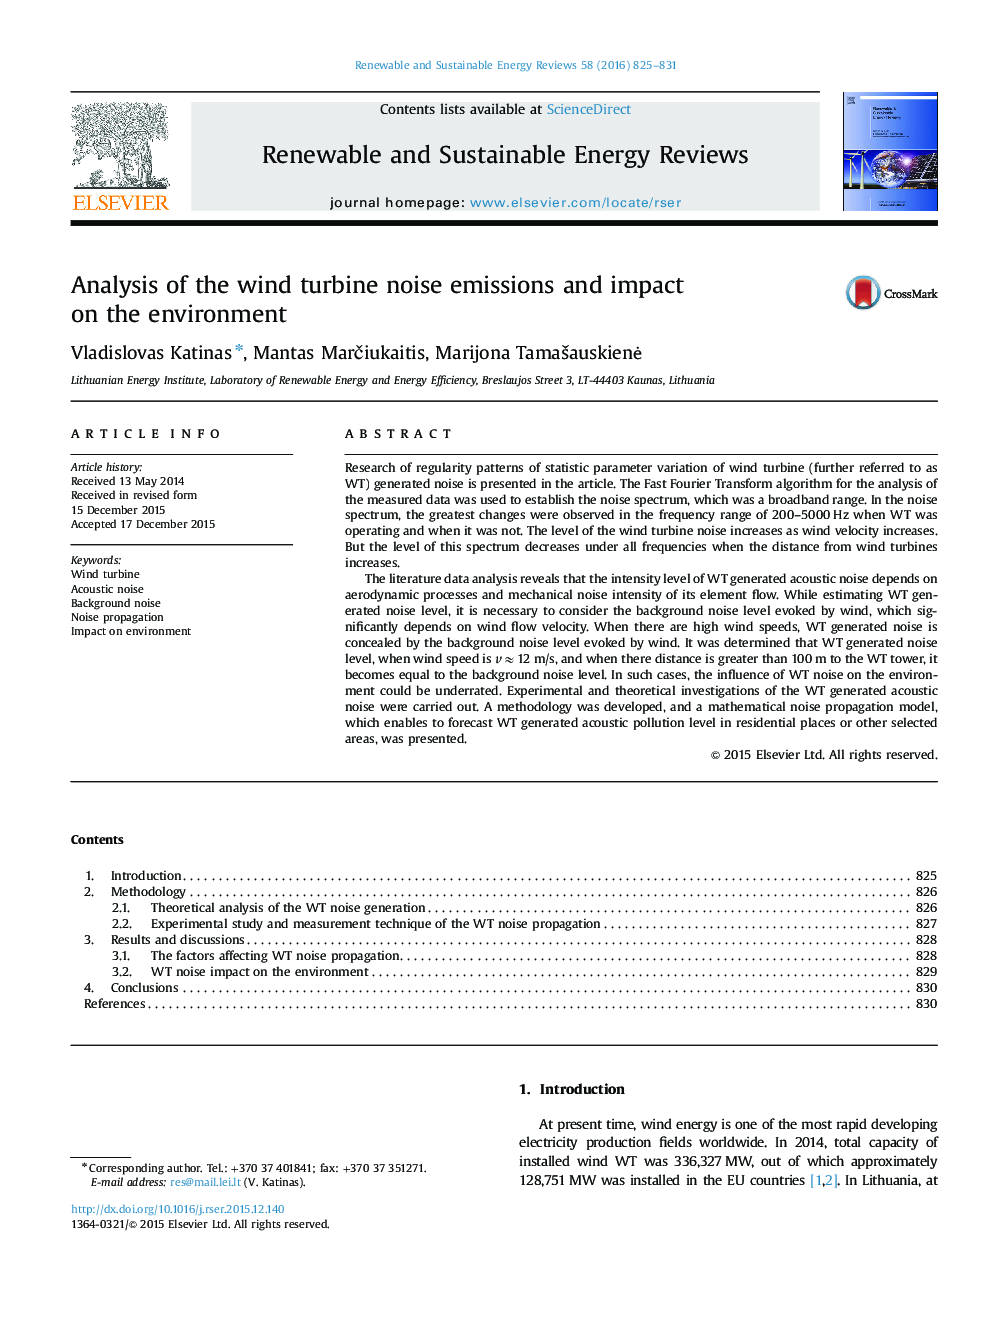 Analysis of the wind turbine noise emissions and impact on the environment